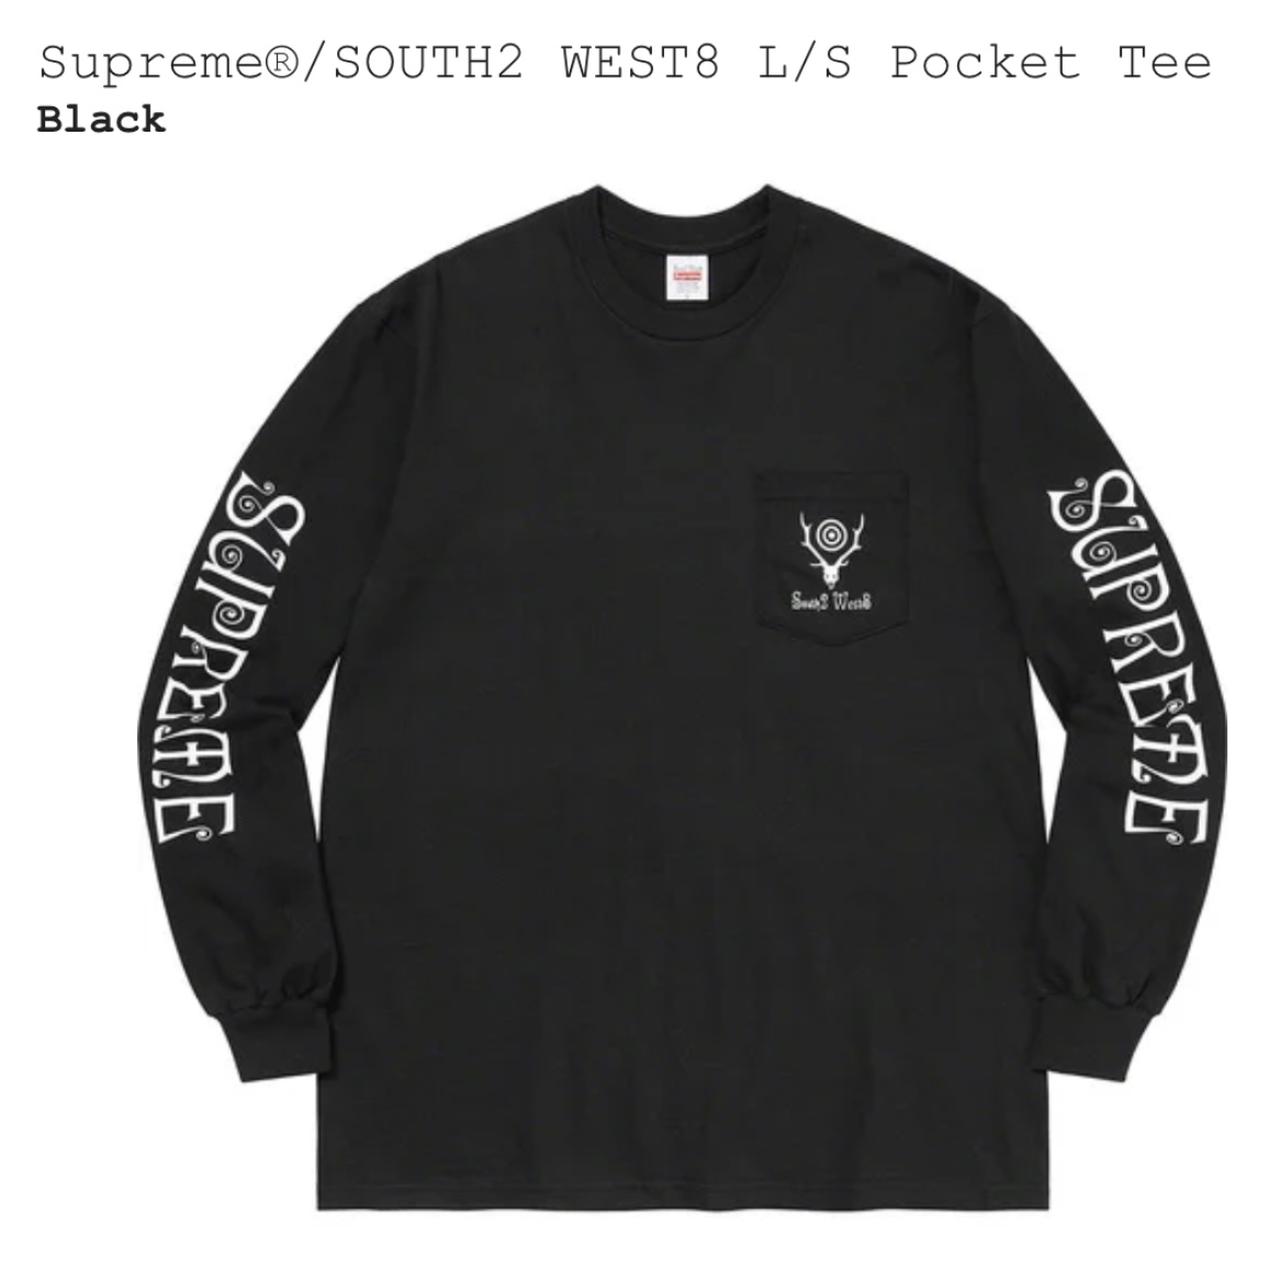 BRAND NEW , Supreme SOUTH2 WEST8 L/S pocket tee...